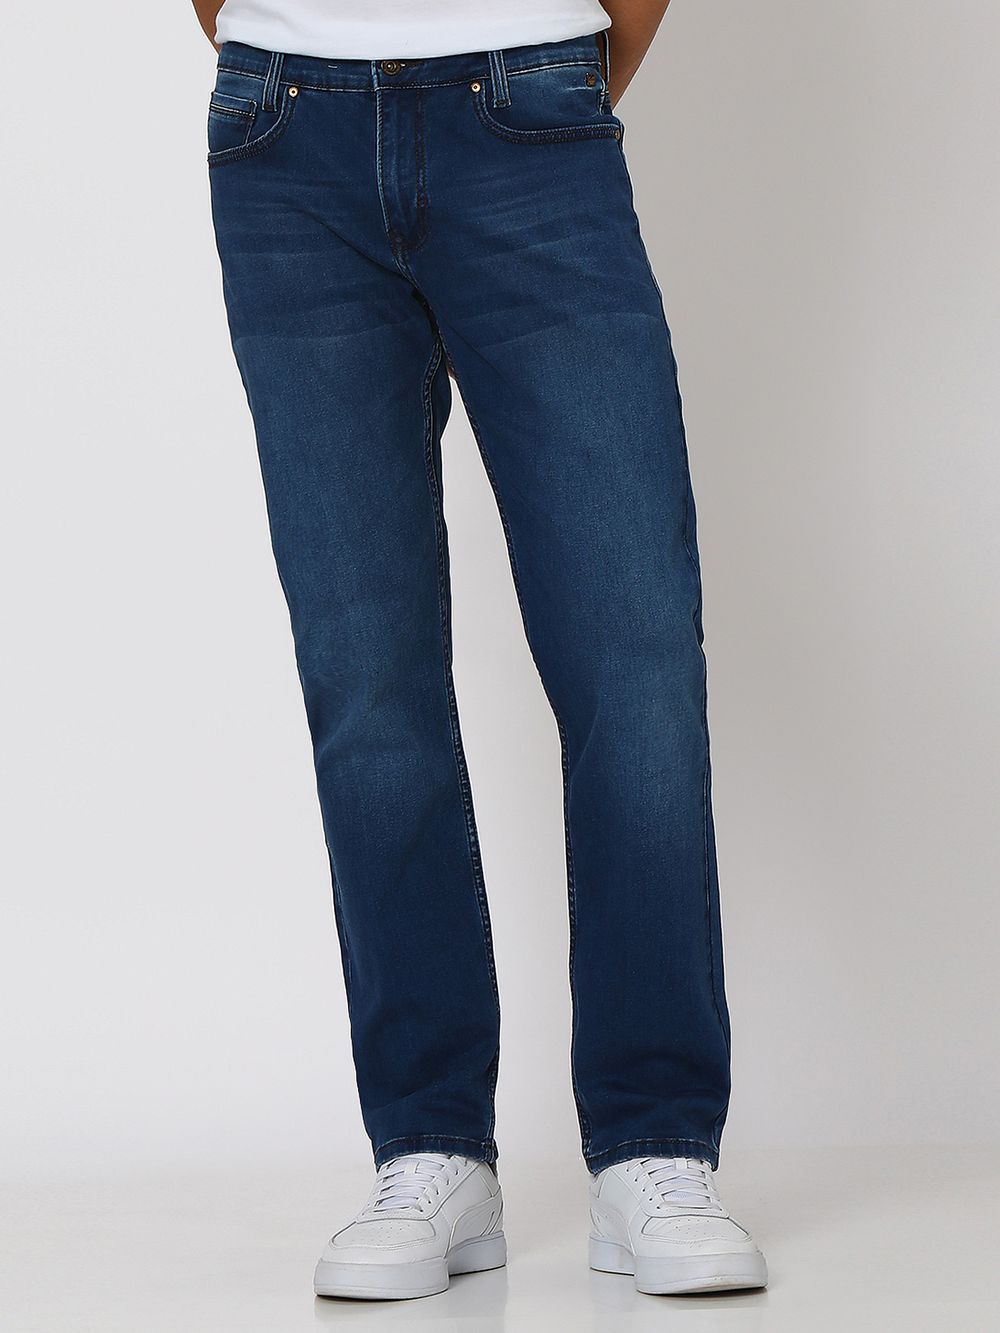 Blue Black Relaxed Straight Fit Originals Stretch Jeans